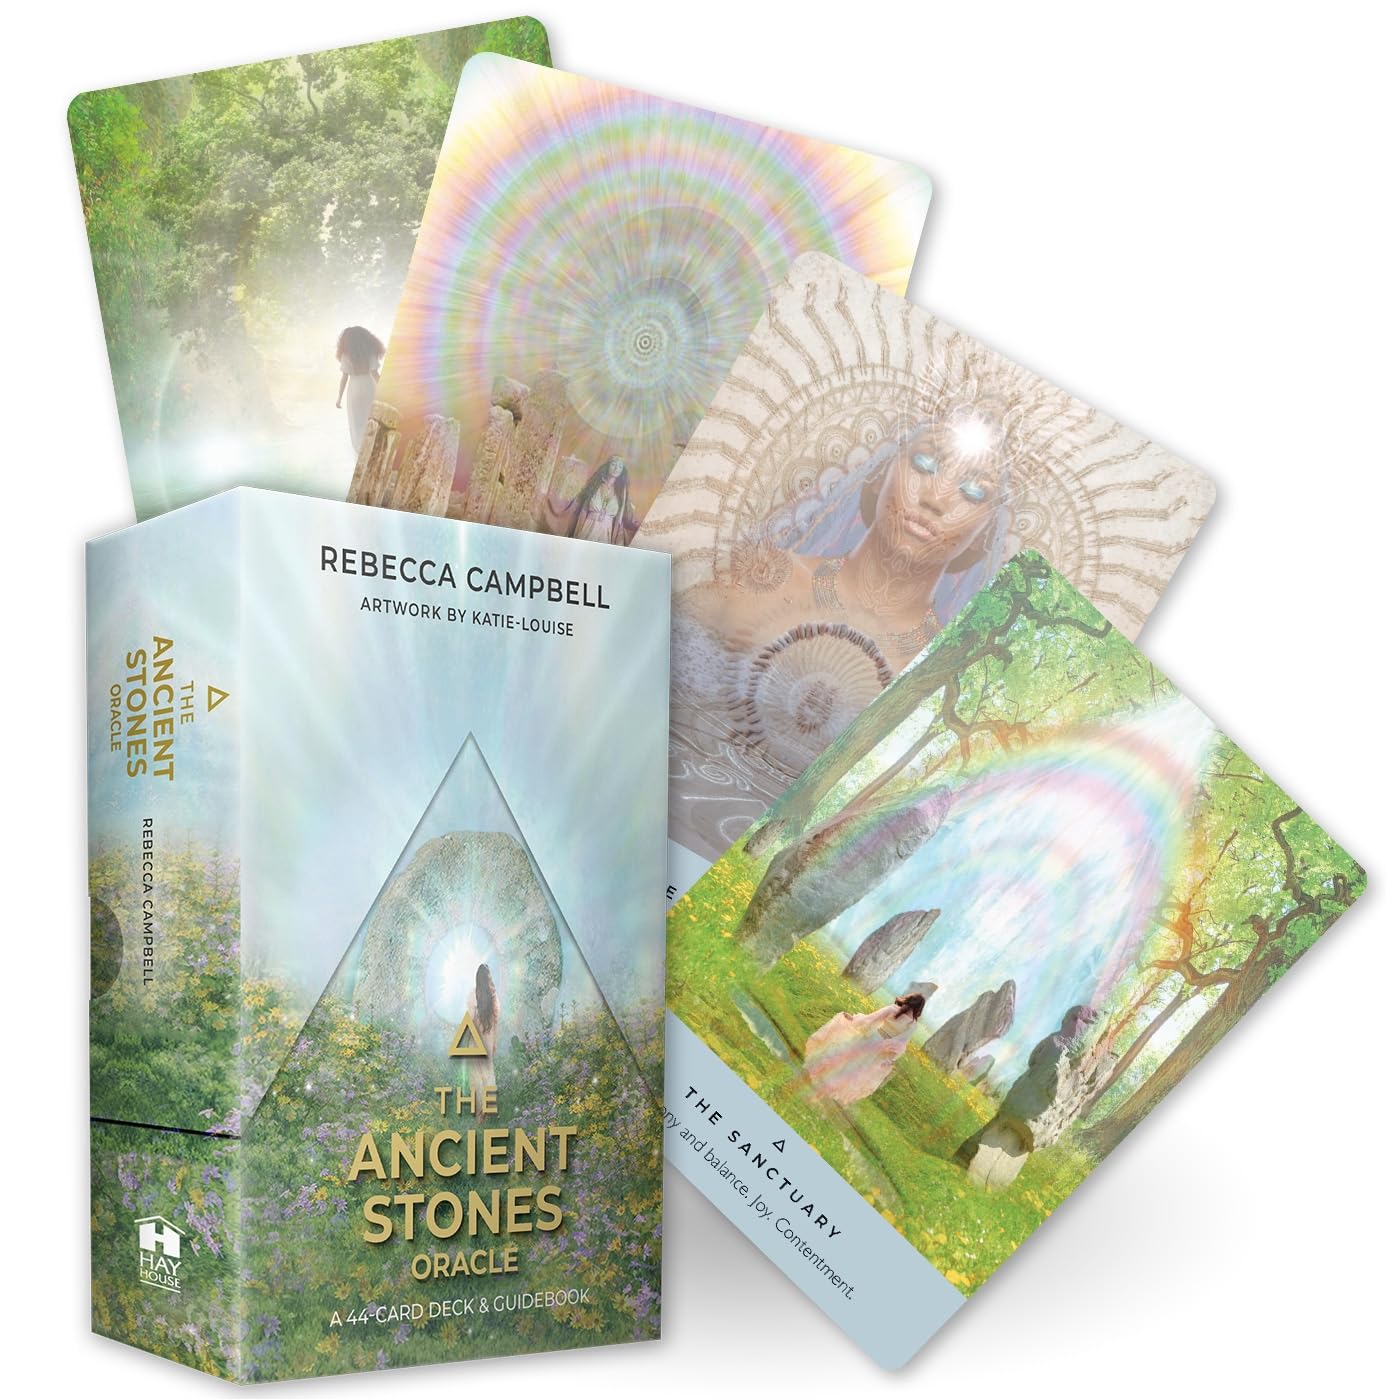 The Ancient Stones Oracle: Card Deck and Guidebook || Rebecca Campbell